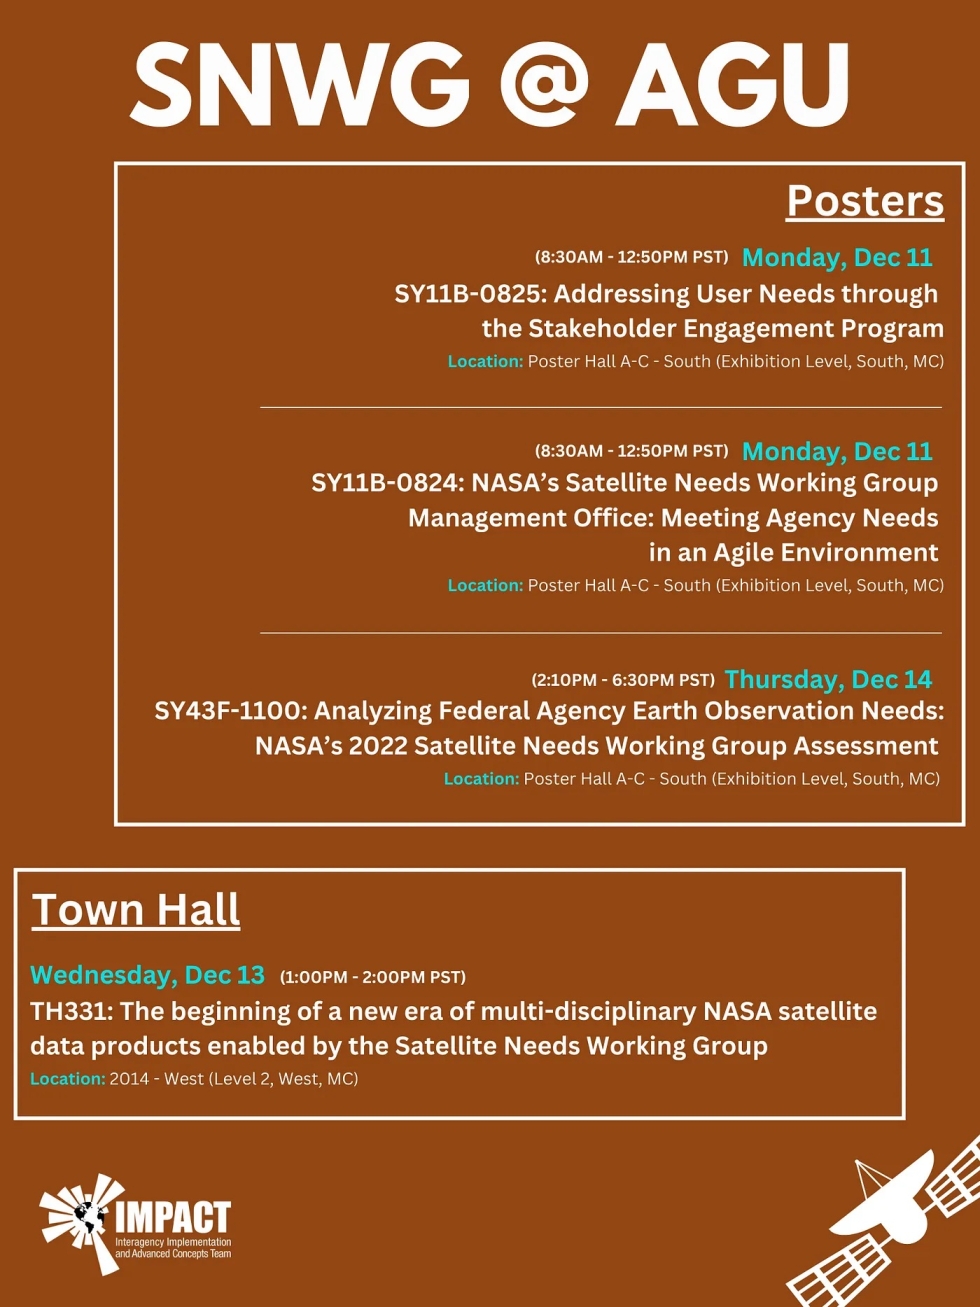 Poster for sessions hosted by NASA's Satellite Needs Working Group at the Sessions hosted by NASA's Science Discovery Engine the American Geophysical Union's 2023 annual meeting